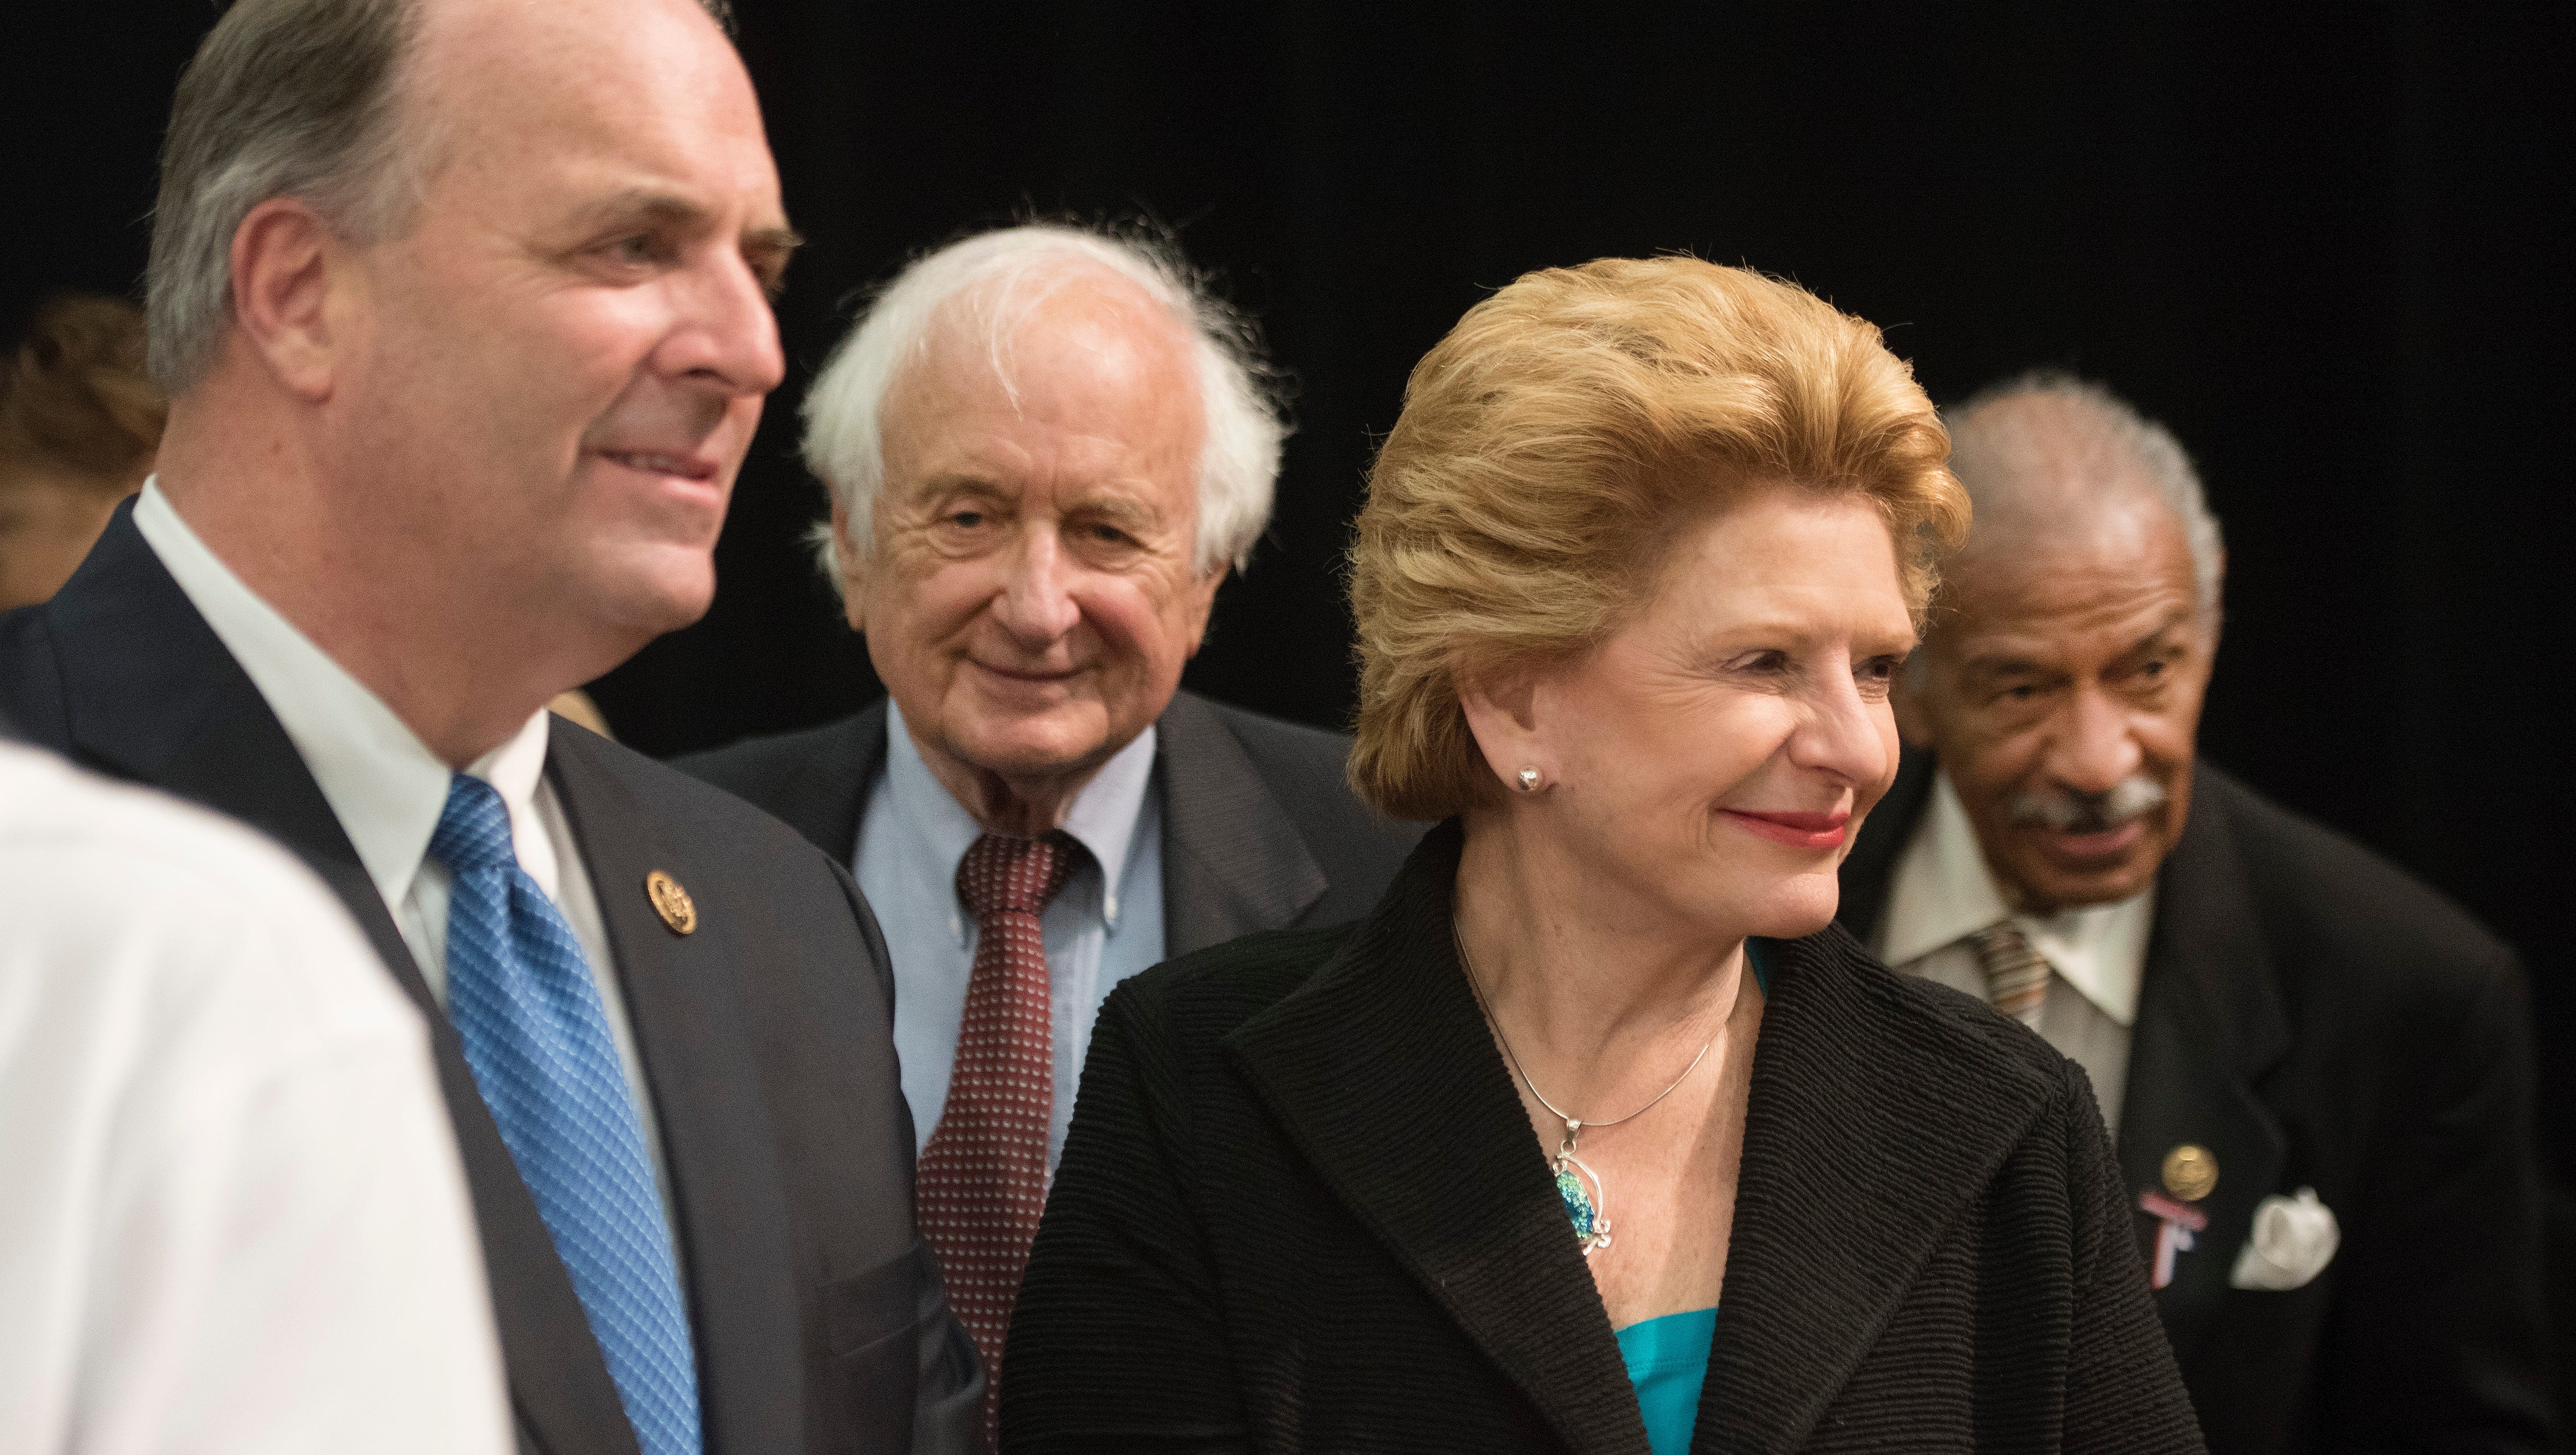 Michigan politicians Rep. Dan Kildee, from far left, Rep. Sander Levin, Sen. Debbie Stabenow and Rep. John Conyers attend the speech  by President Barack Obama at Northwestern High School in Flint.